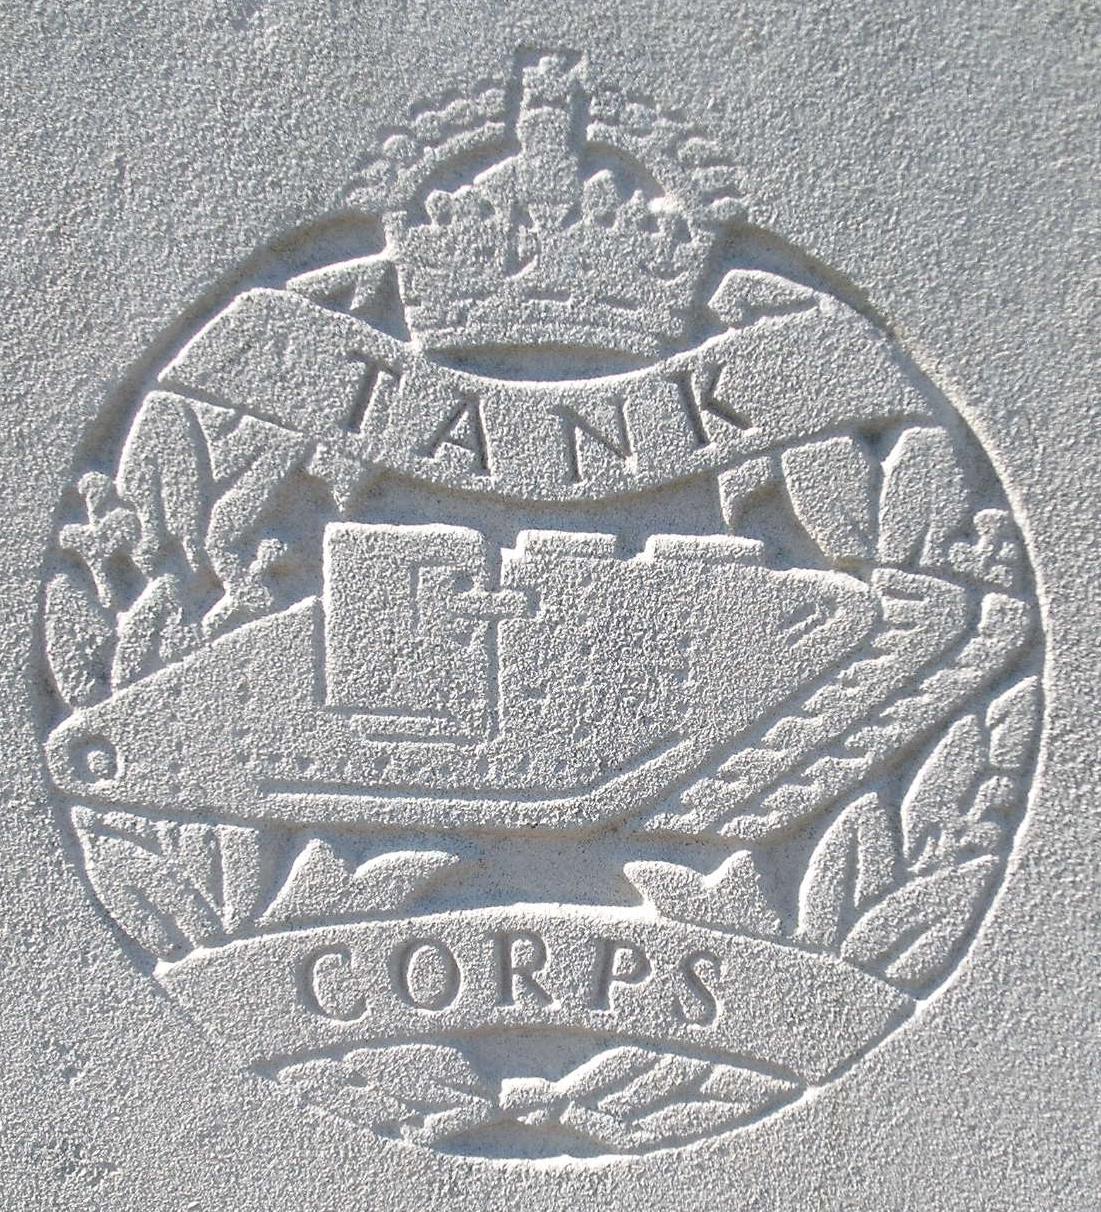 Capbadge of the Tank Corps